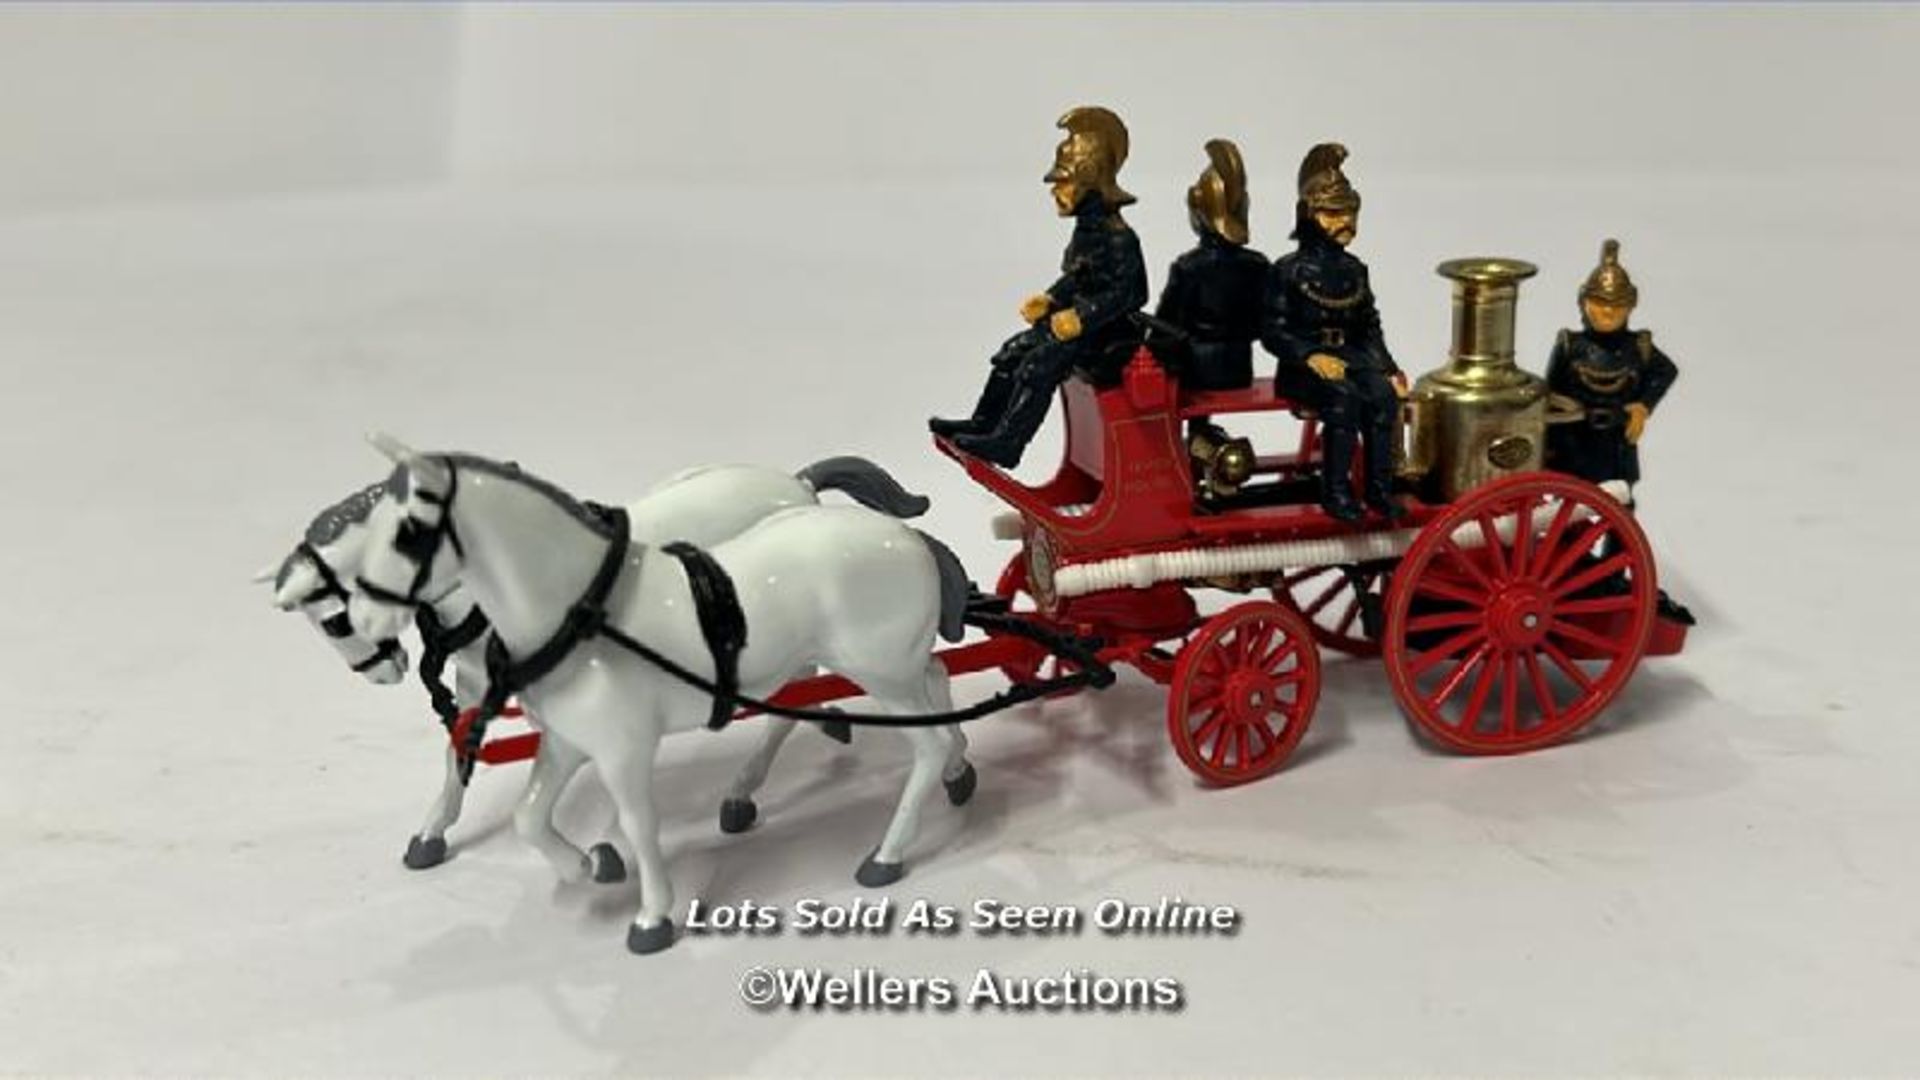 Two unboxed Matchbox models of Yesteryear models including 1905 Bush Fire Engine Y-43 and - Image 6 of 8